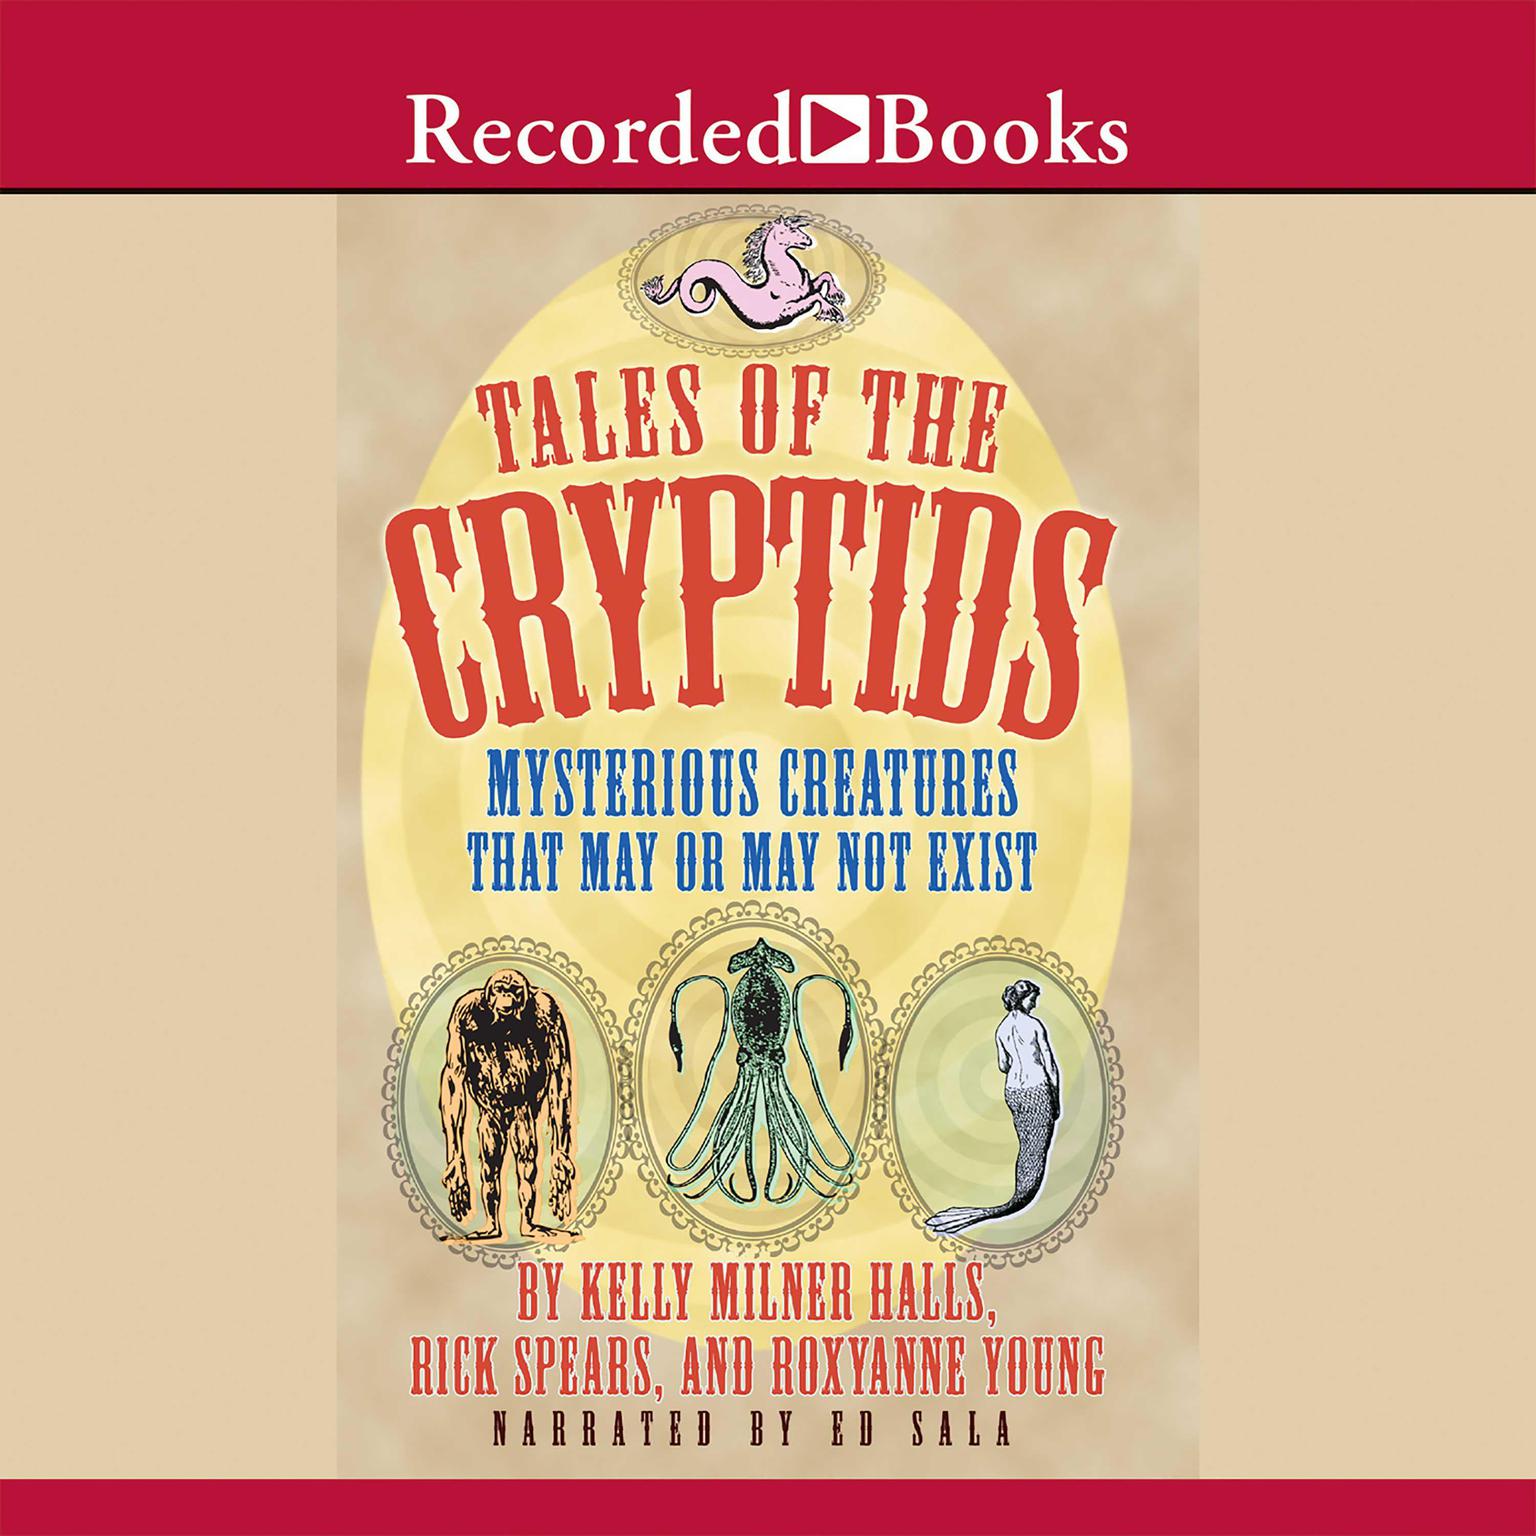 Tales of the Cryptids: Mysterious Creatures That May or May Not Exist Audiobook, by Kelly Milner Halls